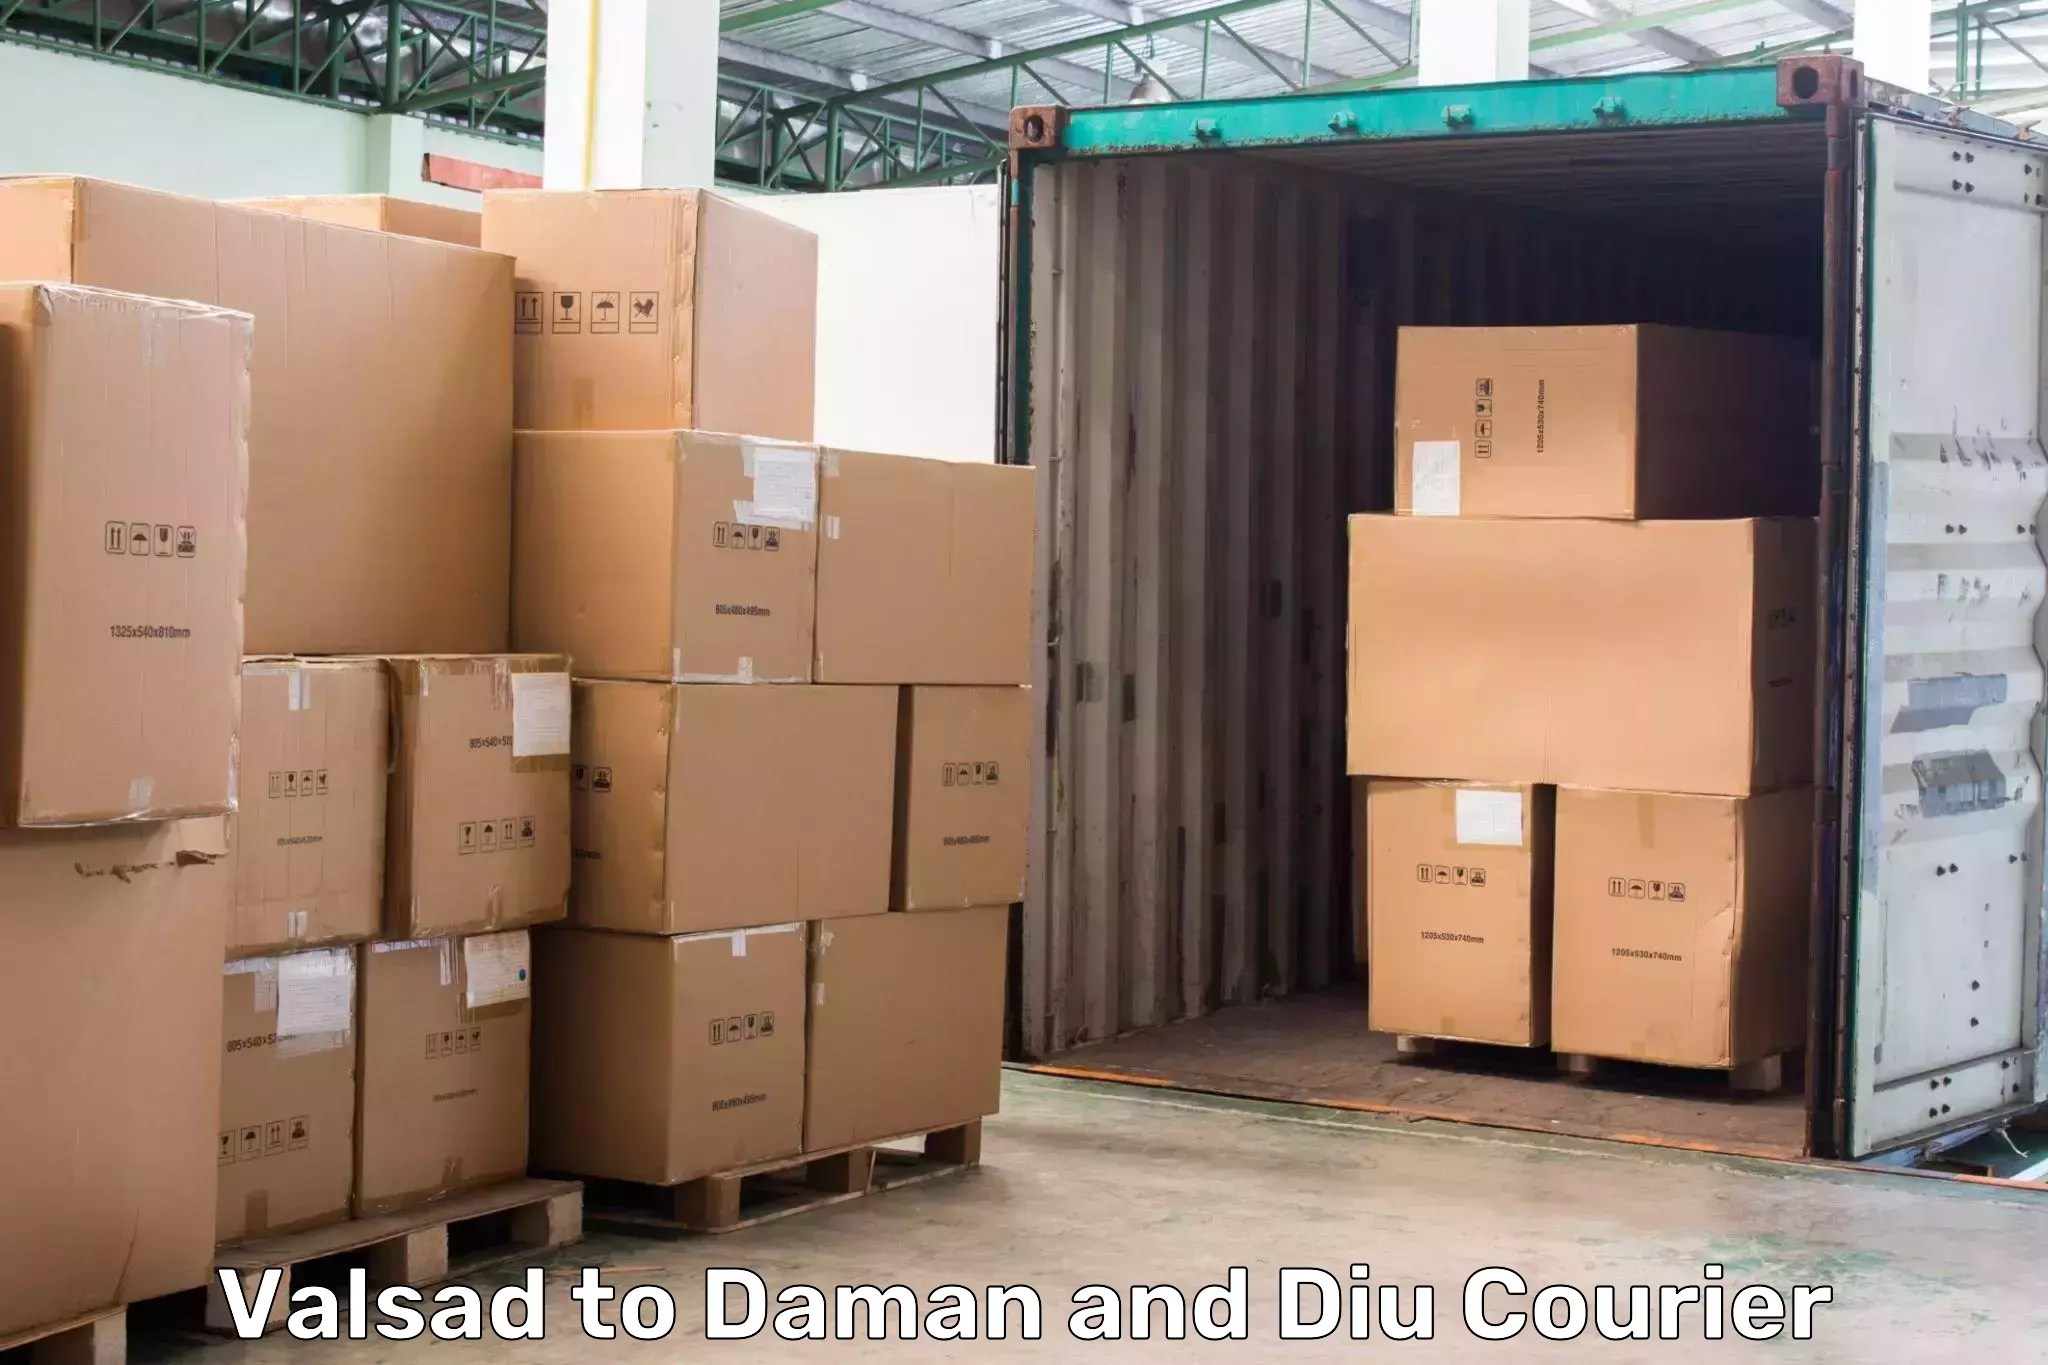 International courier networks Valsad to Daman and Diu